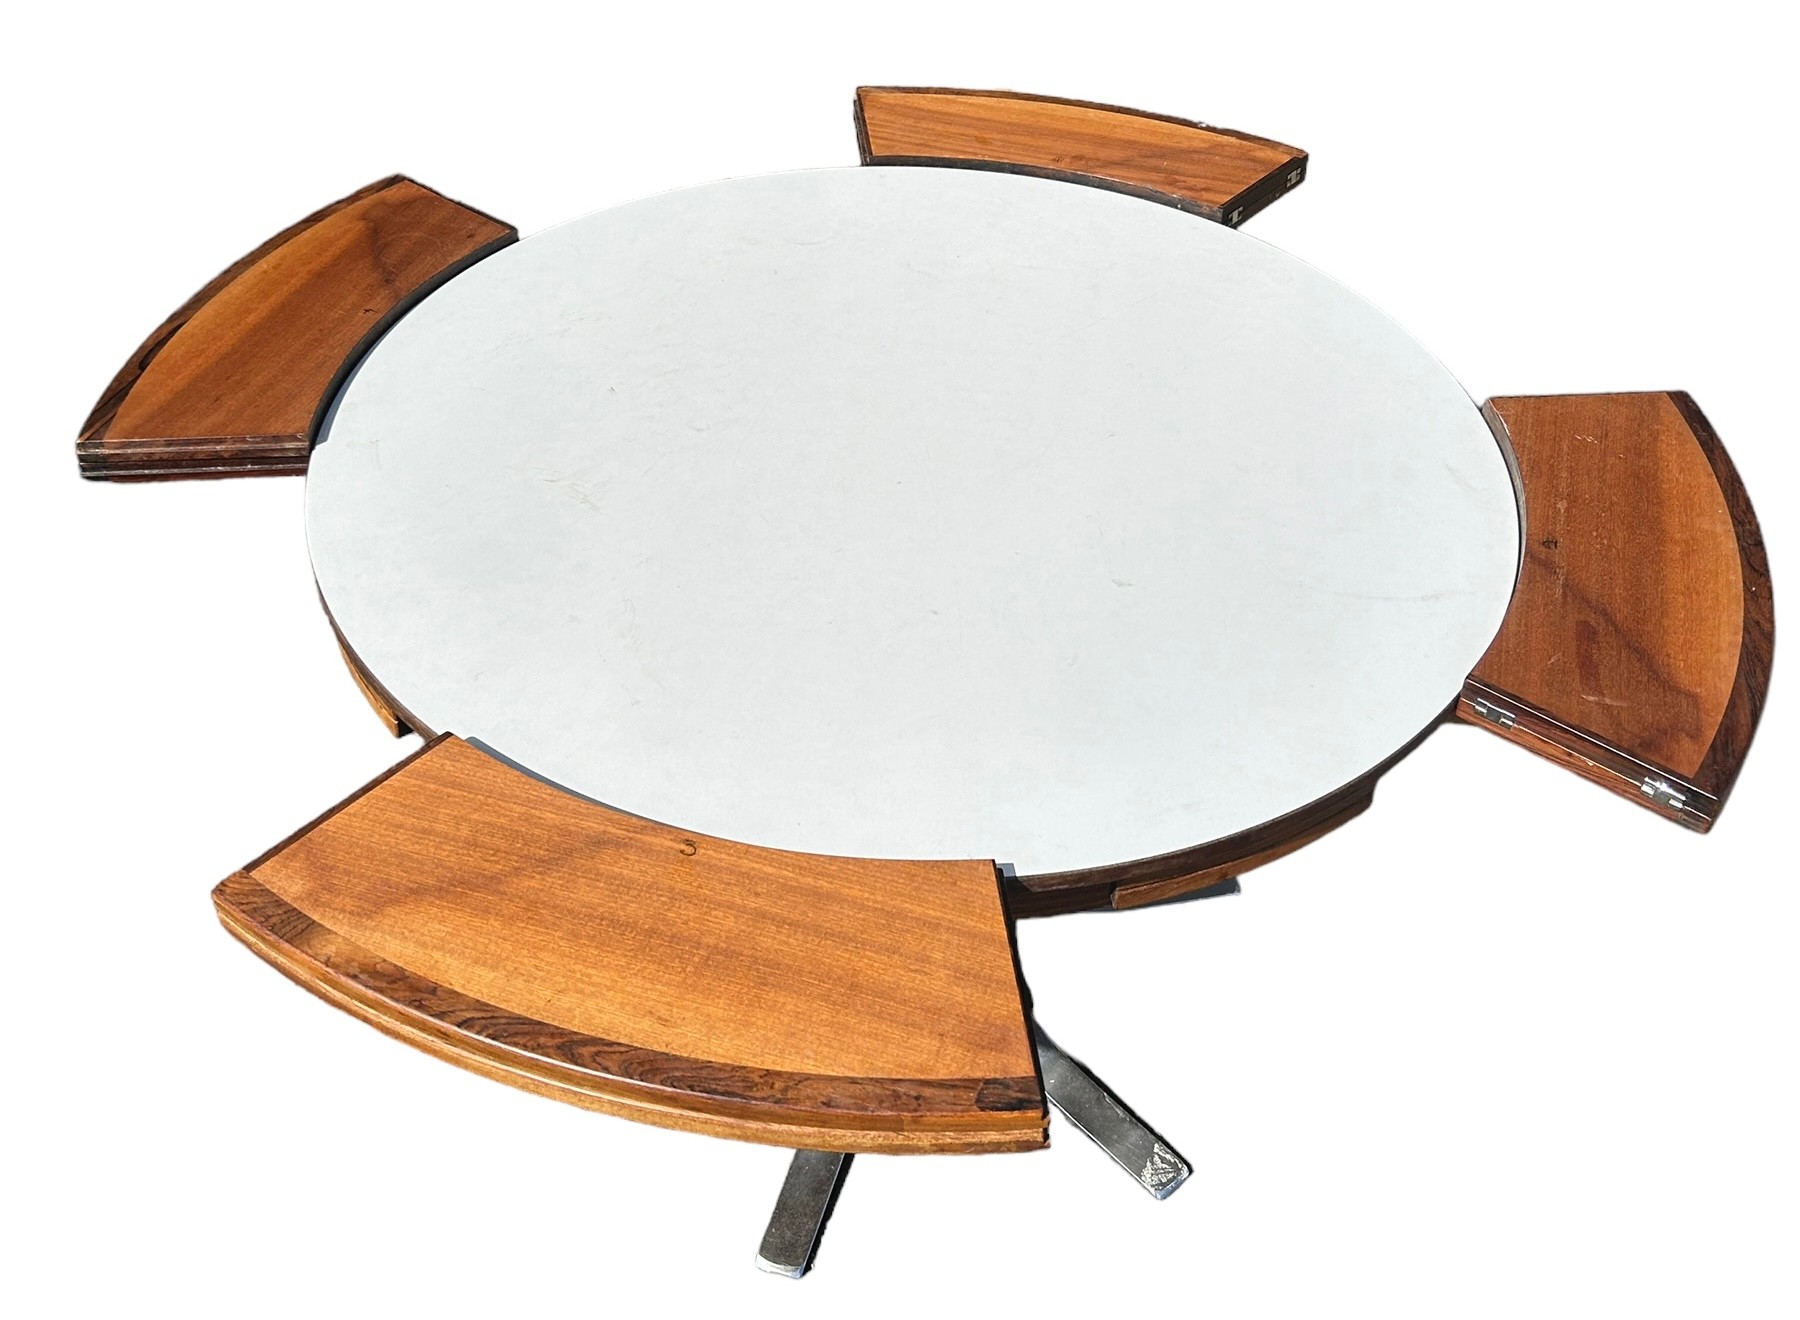 ORIGINAL EXTENDING 1960'S DANISH DINING TABLE BY DRYLUND ON CHROME BASE, Original label and stamps. - Image 8 of 11